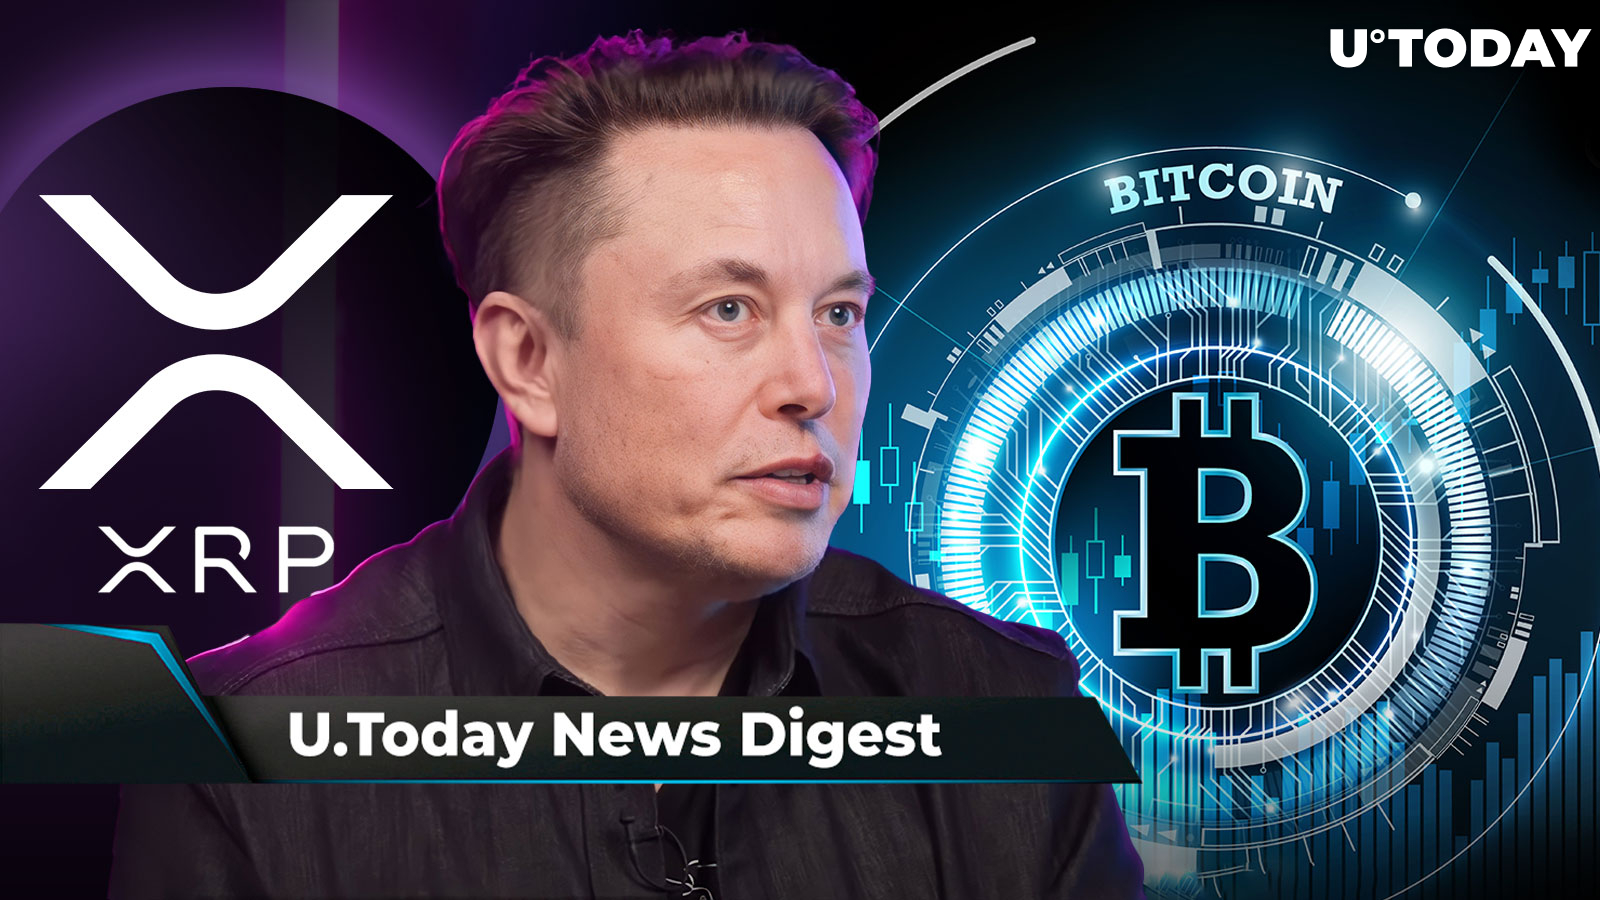 Elon Musk's X Post Triggers Bullish Response From XRP Army, Bitcoin Sets New All-Time High, Shibarium Debuts New Feature: Crypto News Digest by U.Today